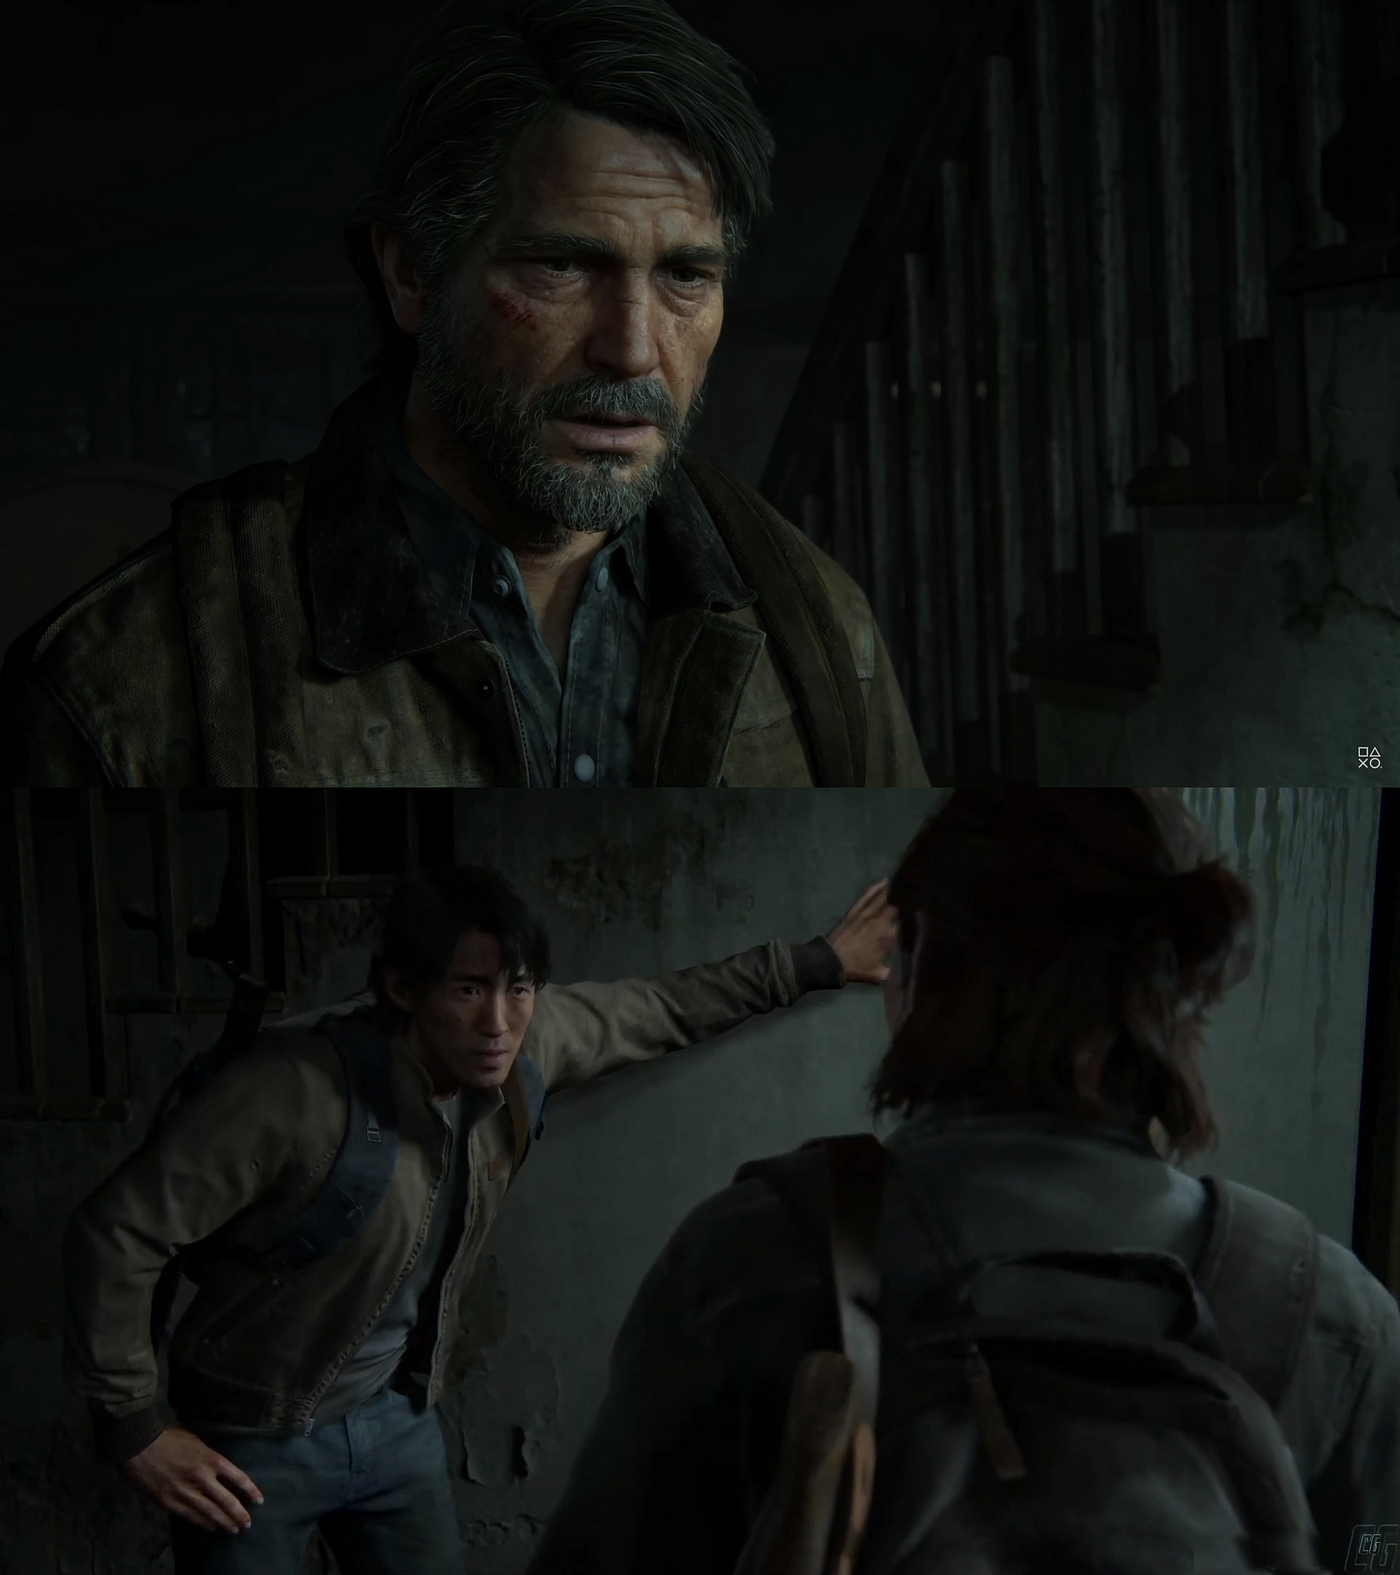 The Failure of The Last of Us Part II, by Arnold Khan